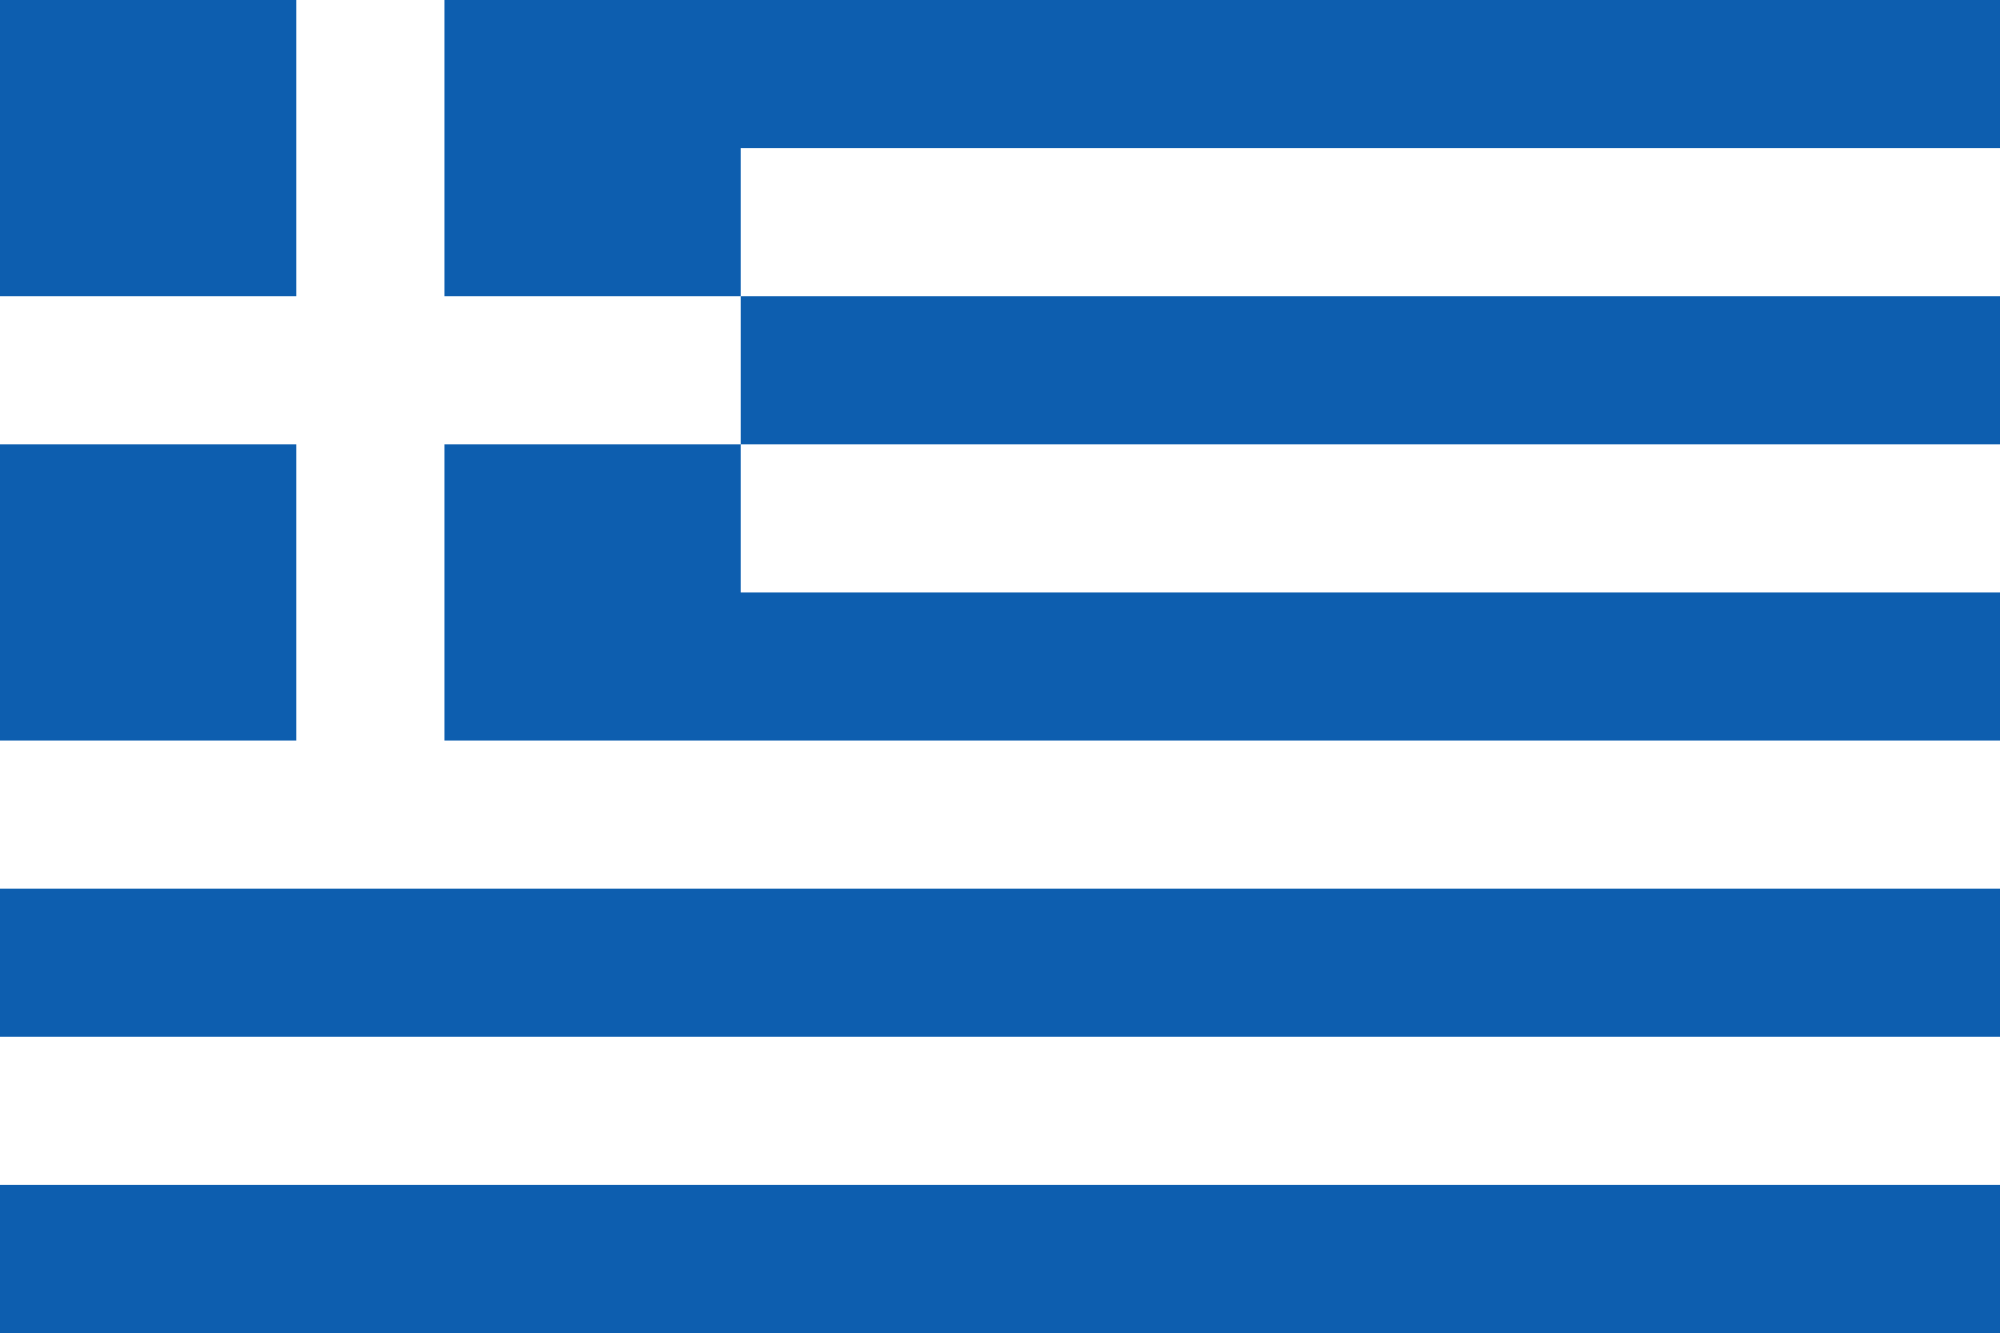 Red Square with White Plus Sign Logo - Flag of Greece